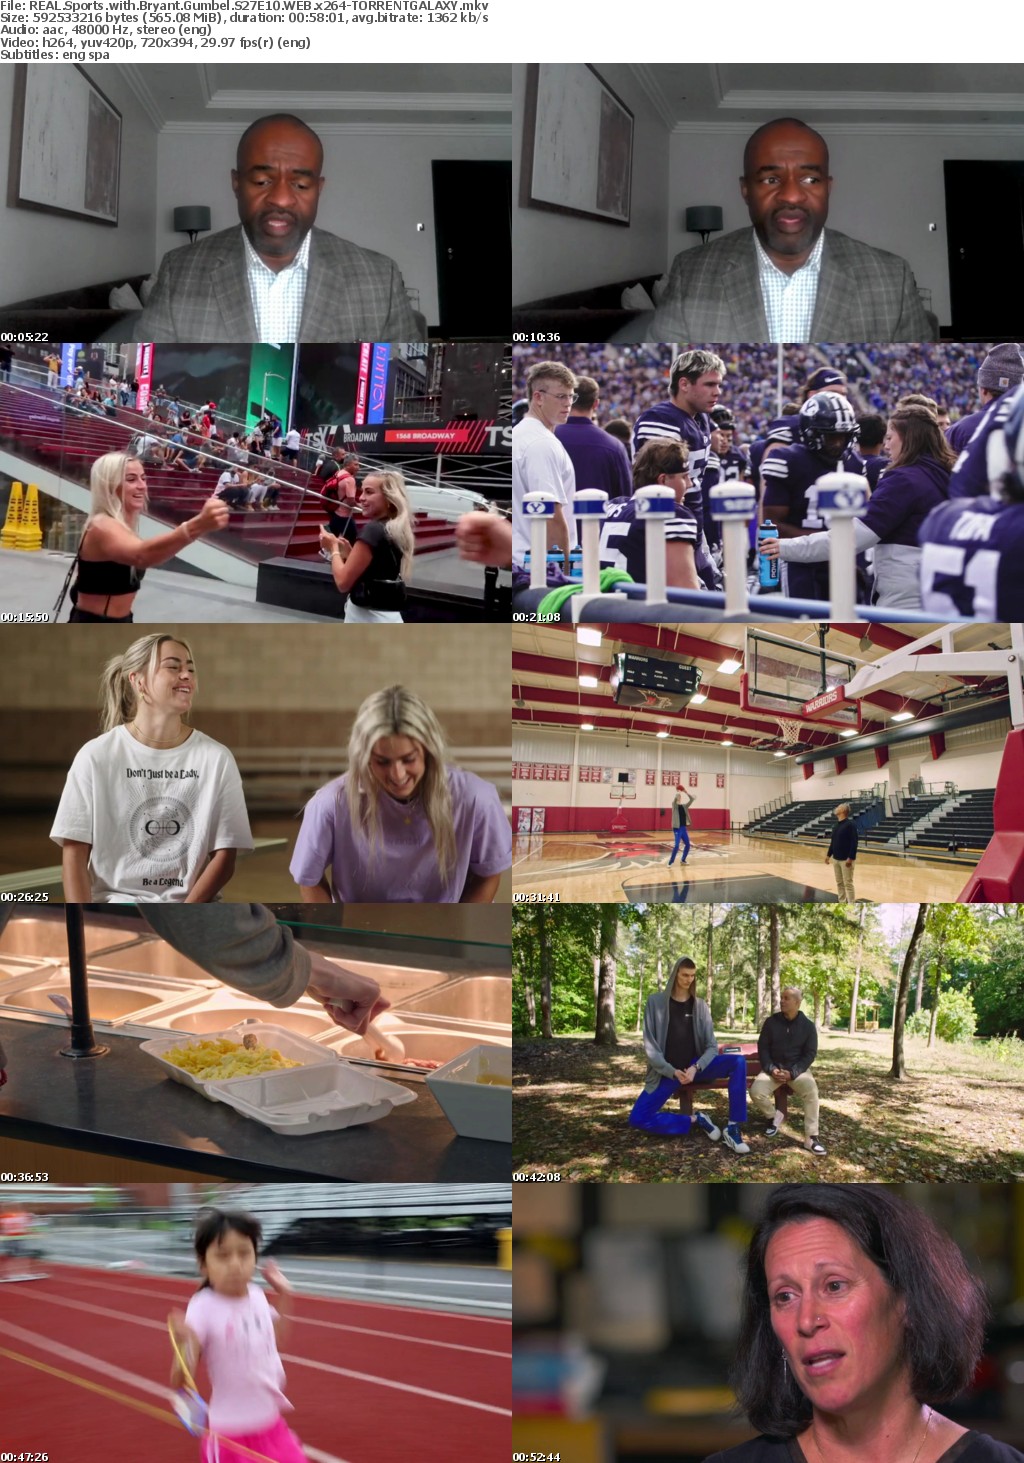 REAL Sports with Bryant Gumbel S27E10 WEB x264-GALAXY